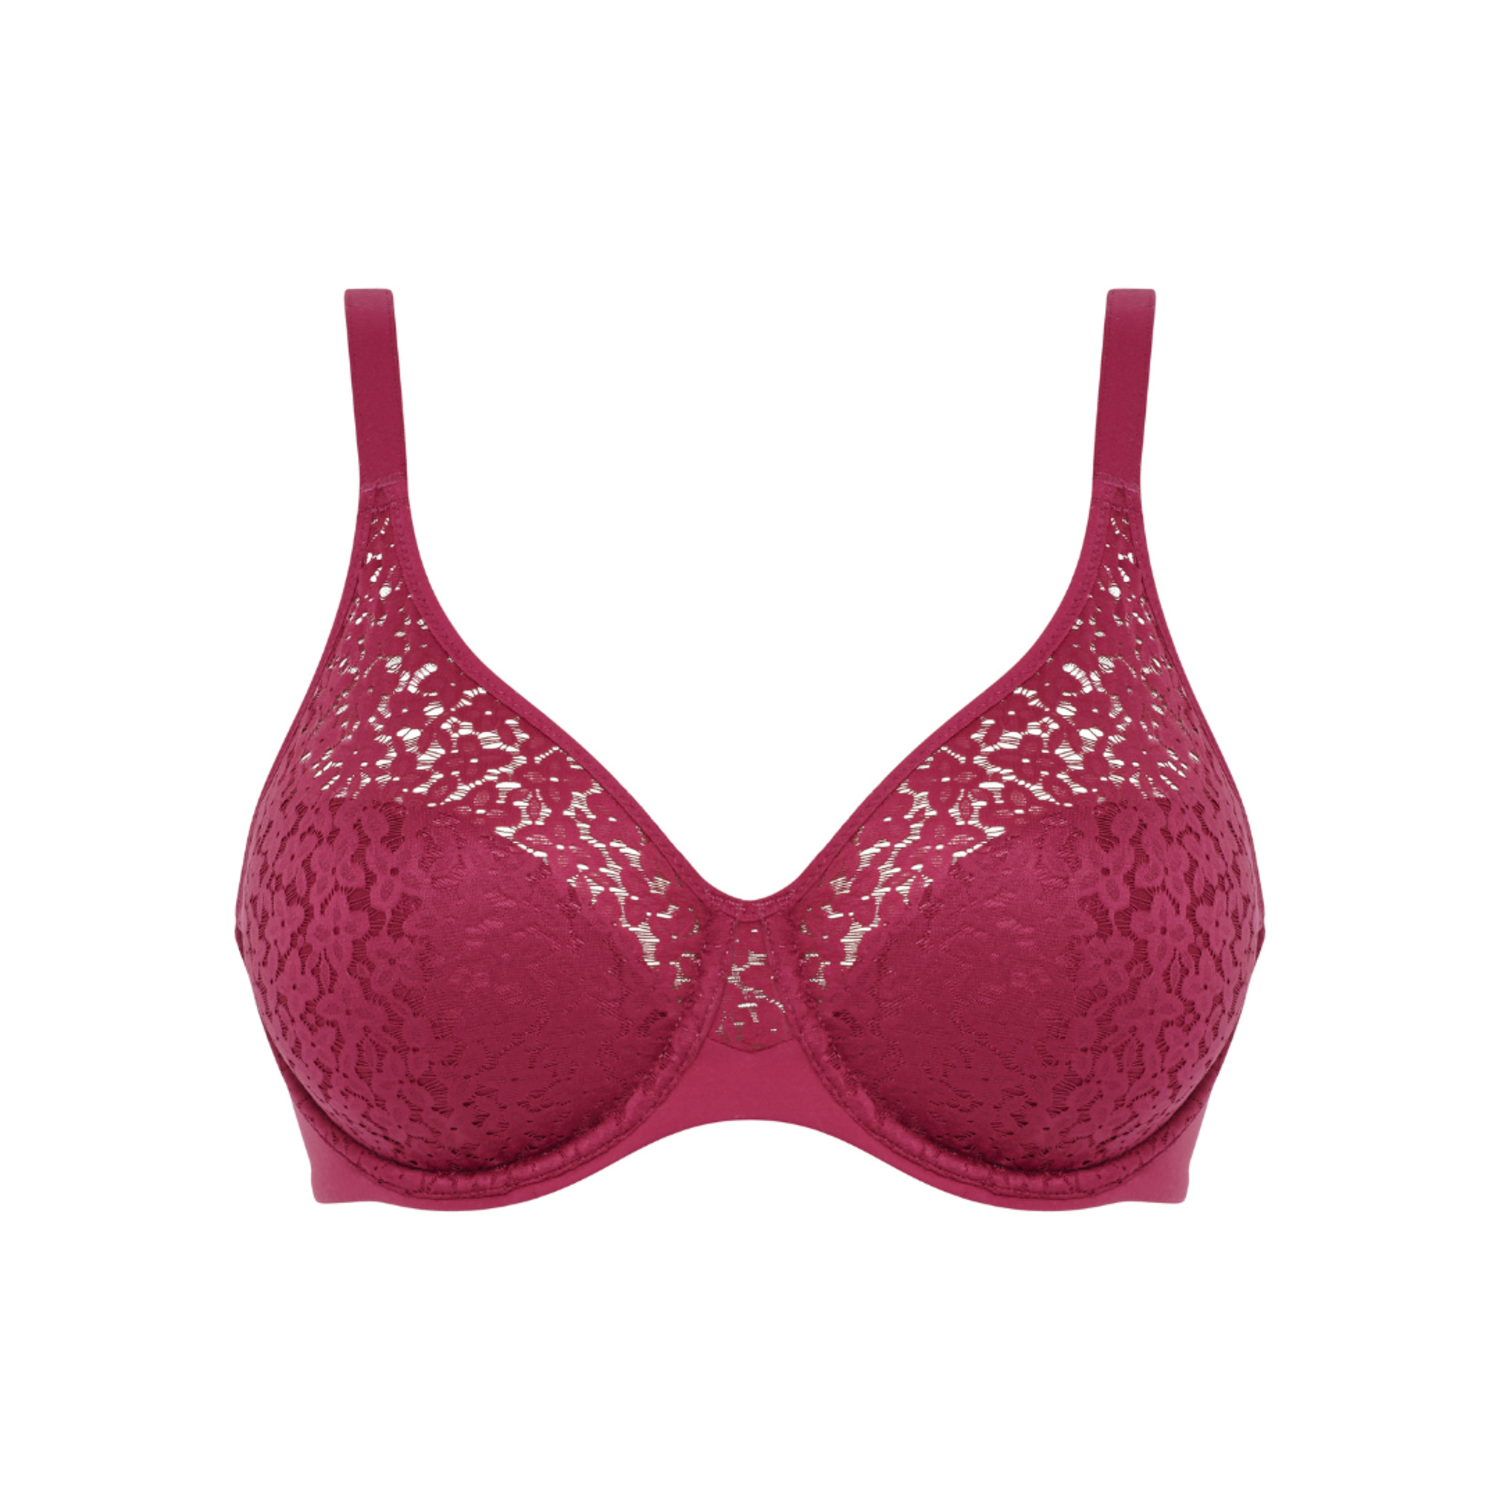 NEW CHANTELLE BRA UK 32D US 32D #3646 C Chic Sexy Sexy Push UP CASSIS  STRAWBERRY